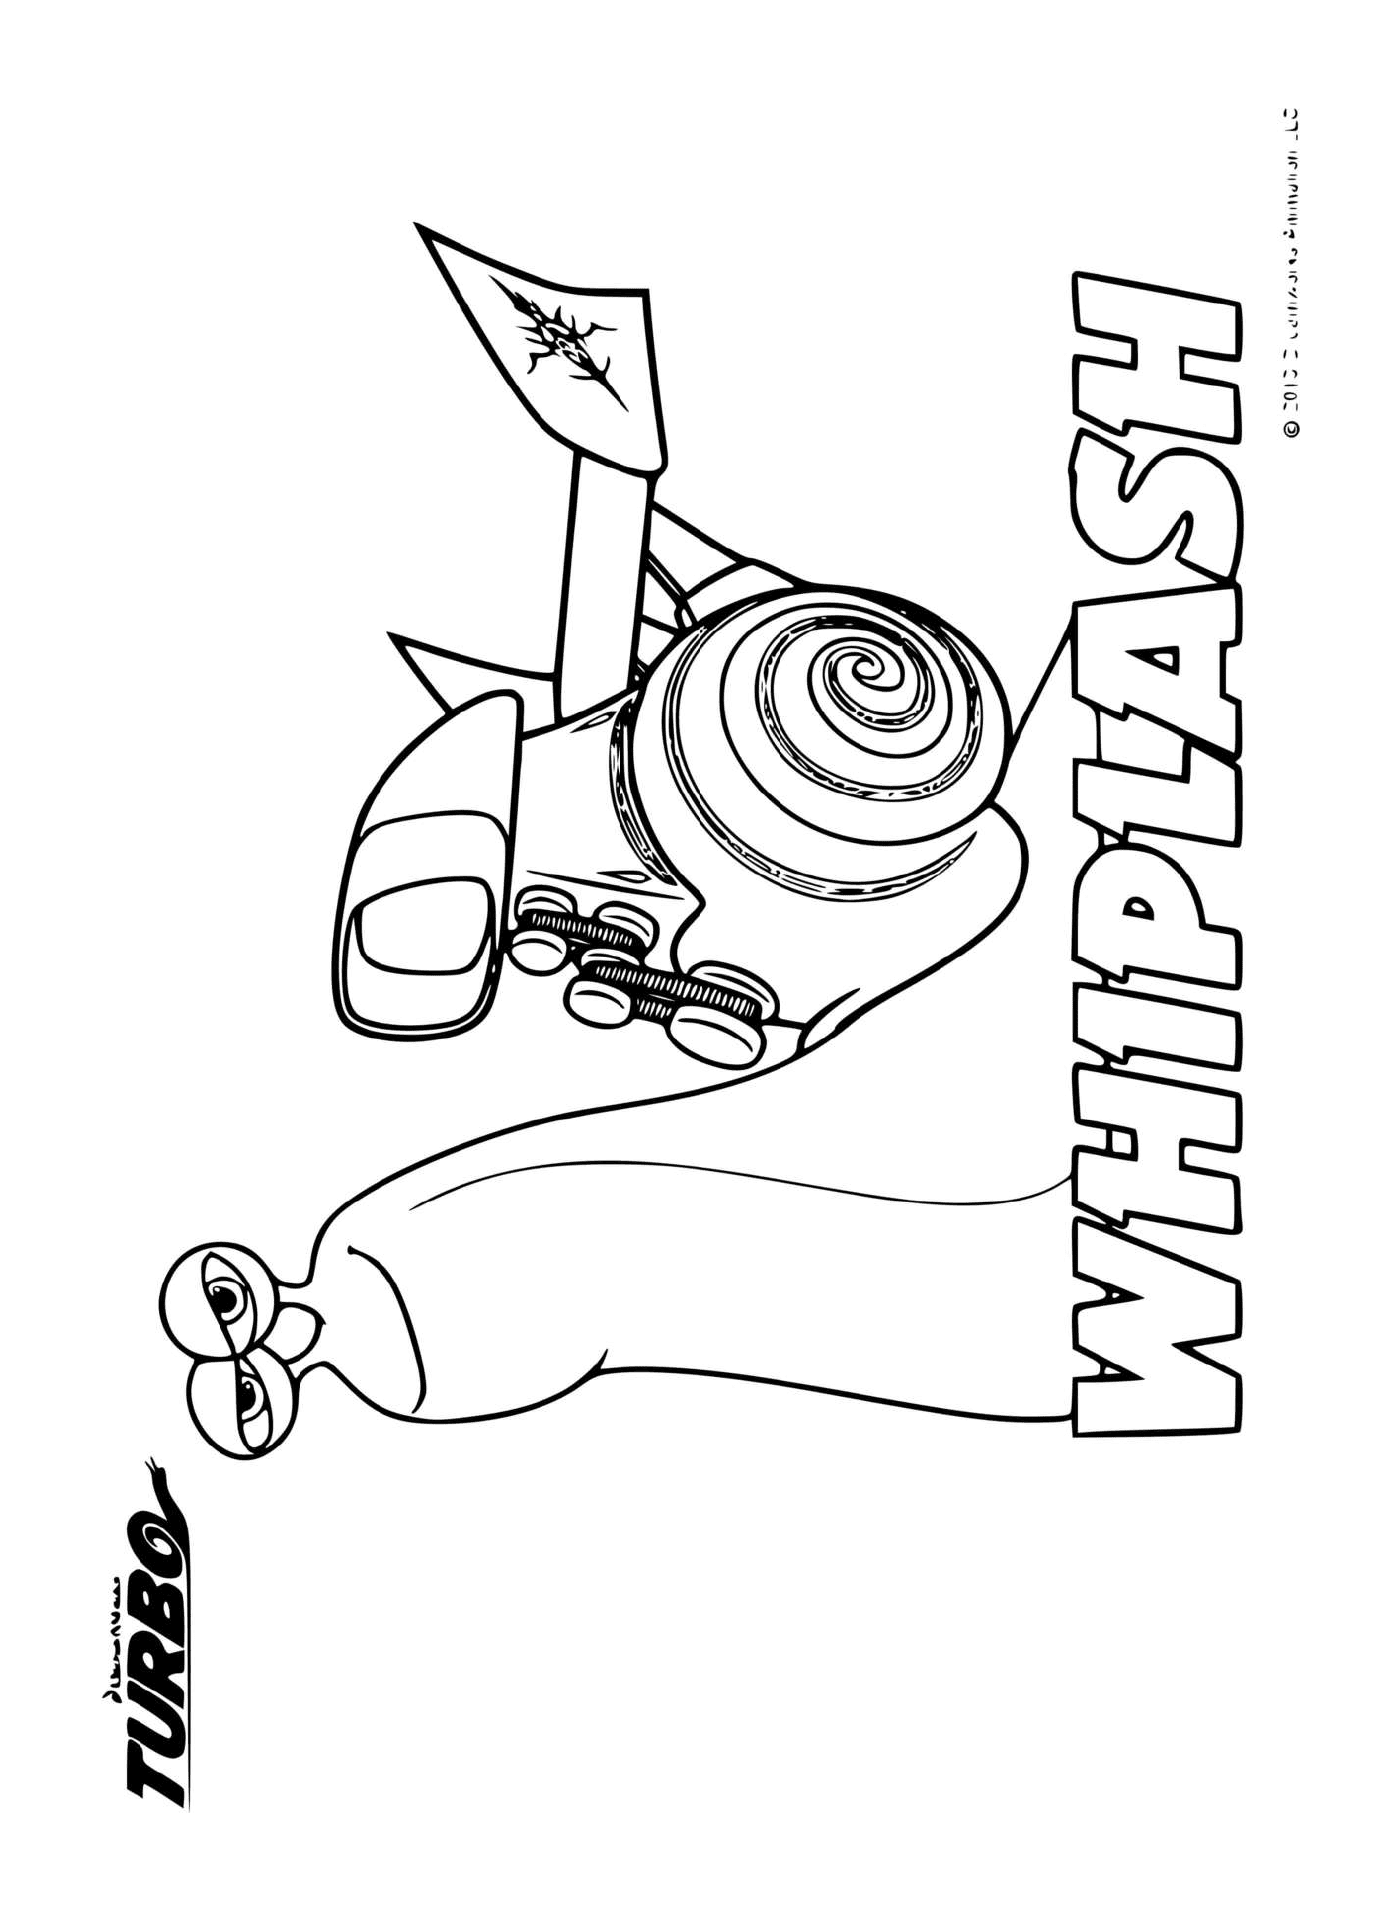  Turbo Whiplash, the snail with a legend 